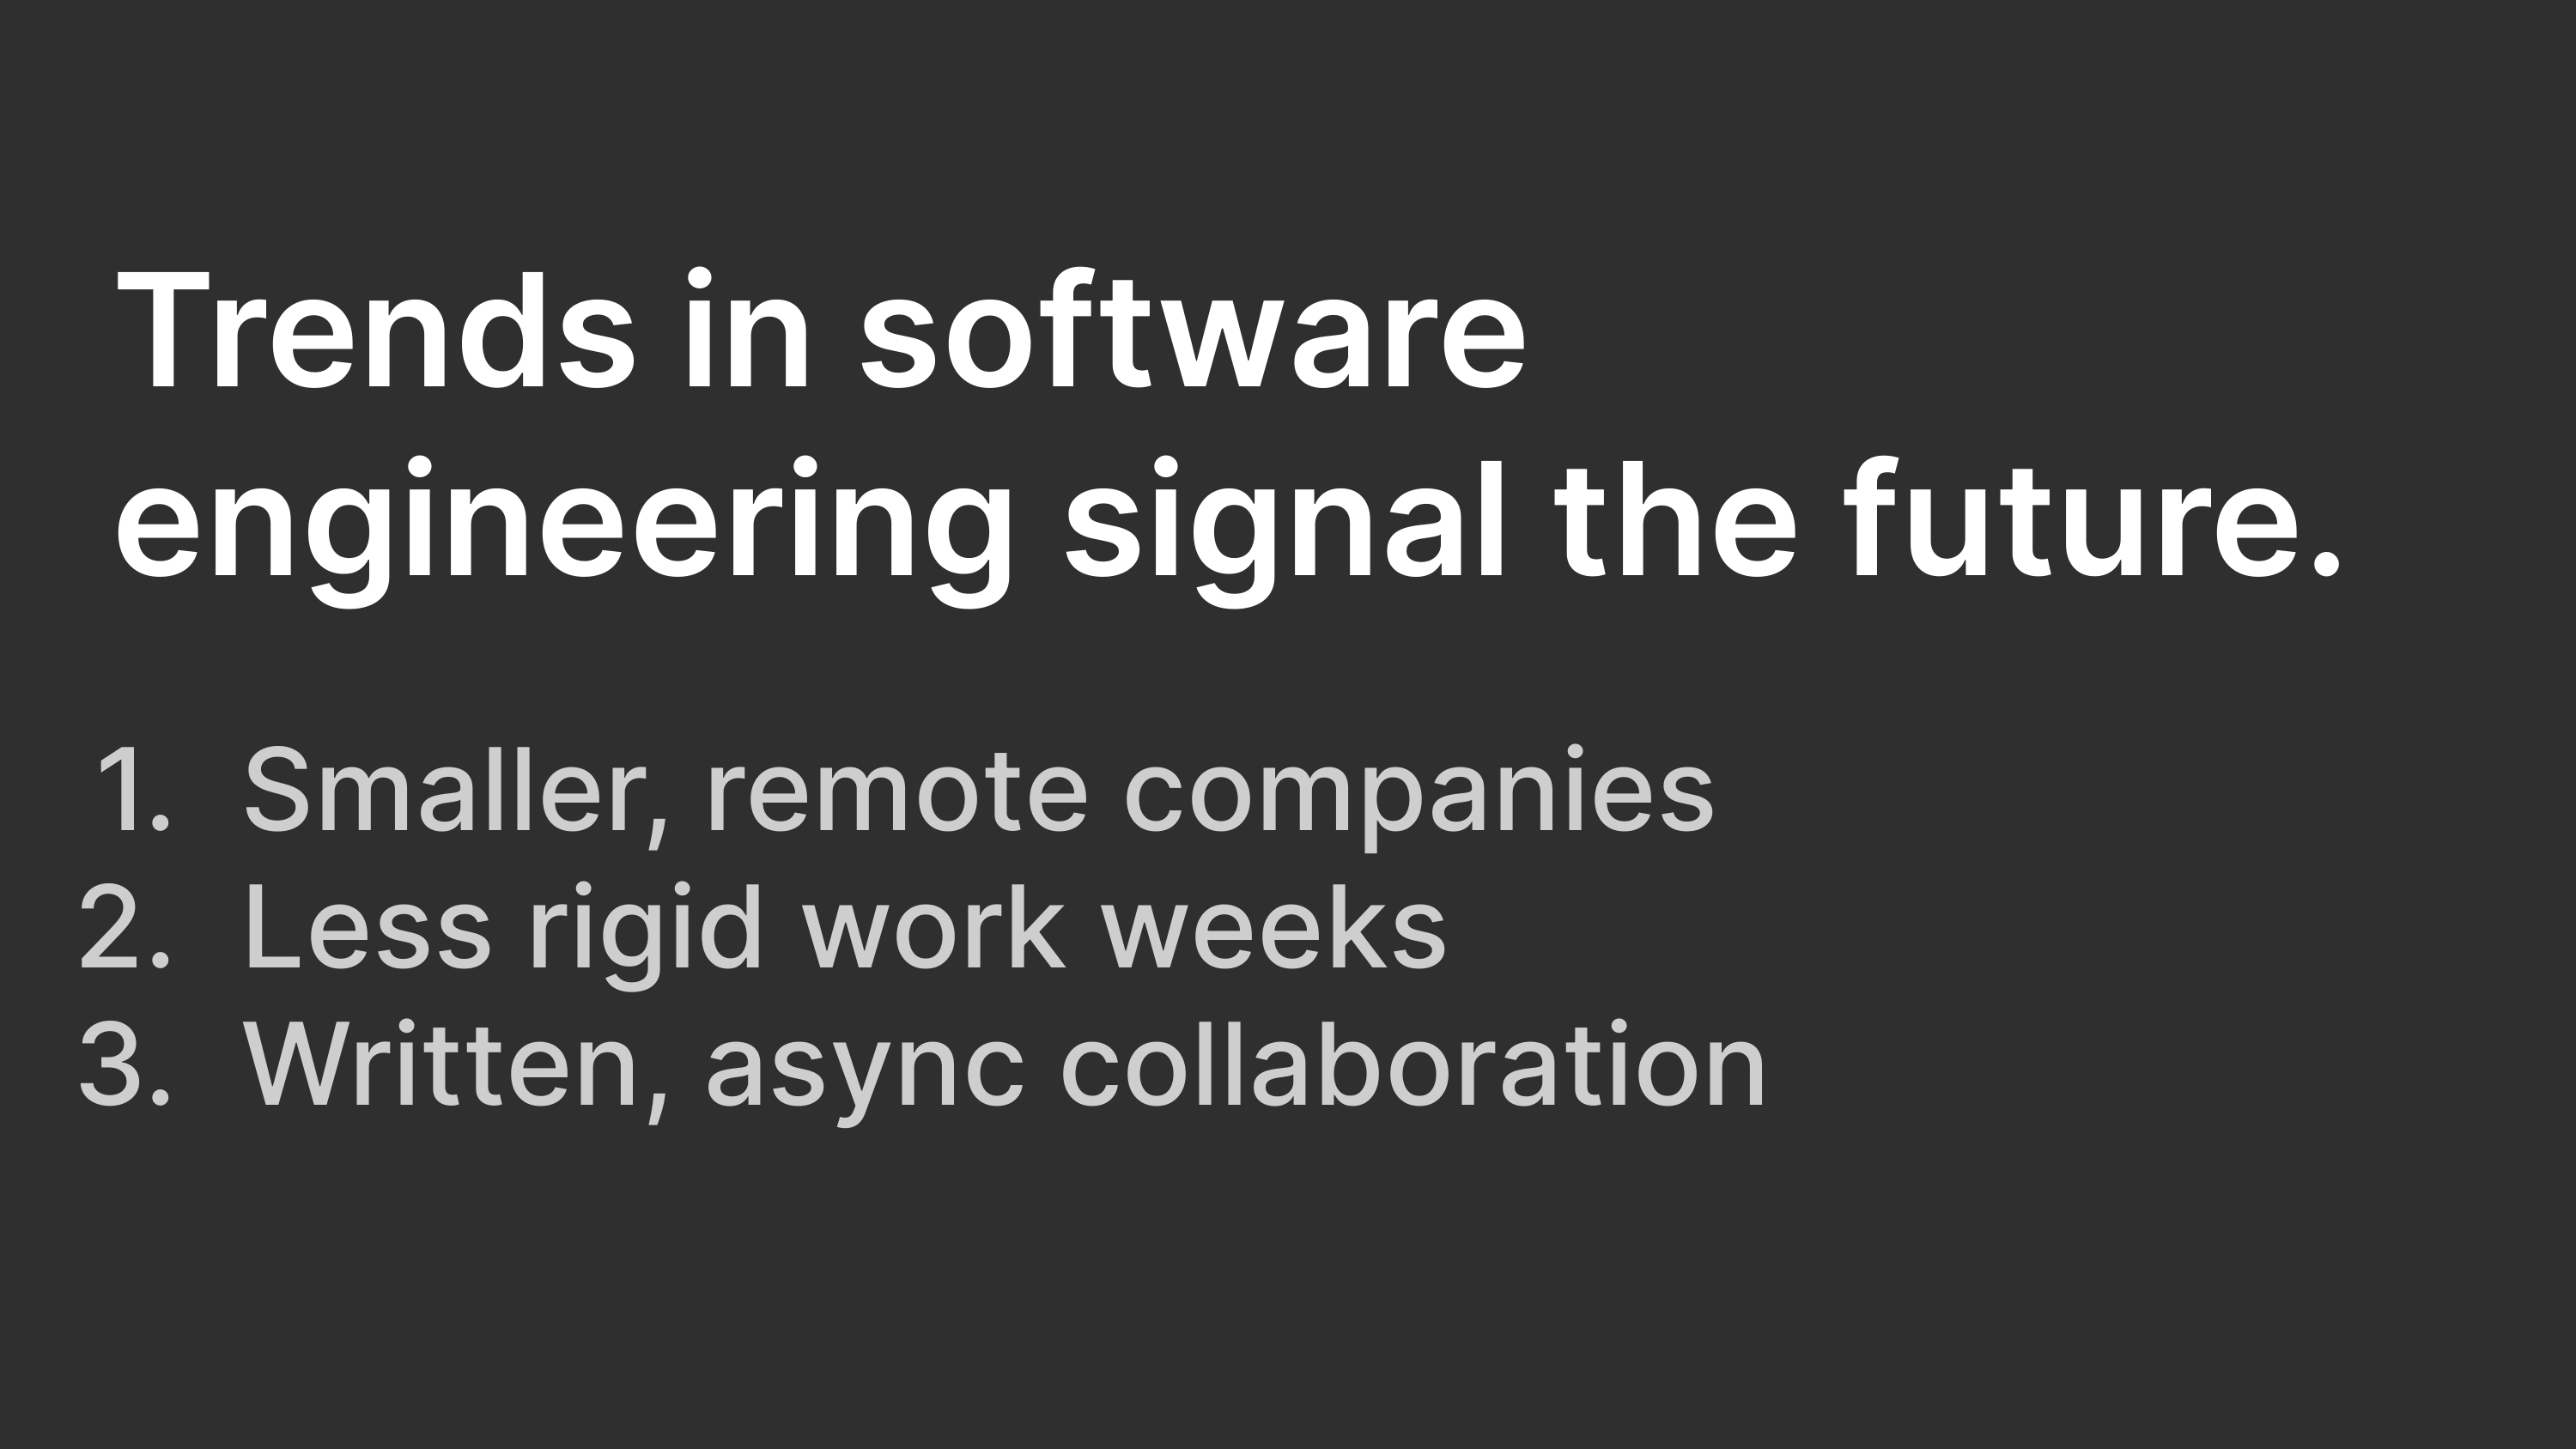 Trends in software engineering signal the future: Smaller, remote teams; Less rigid work weeks; Written, async collaboration.